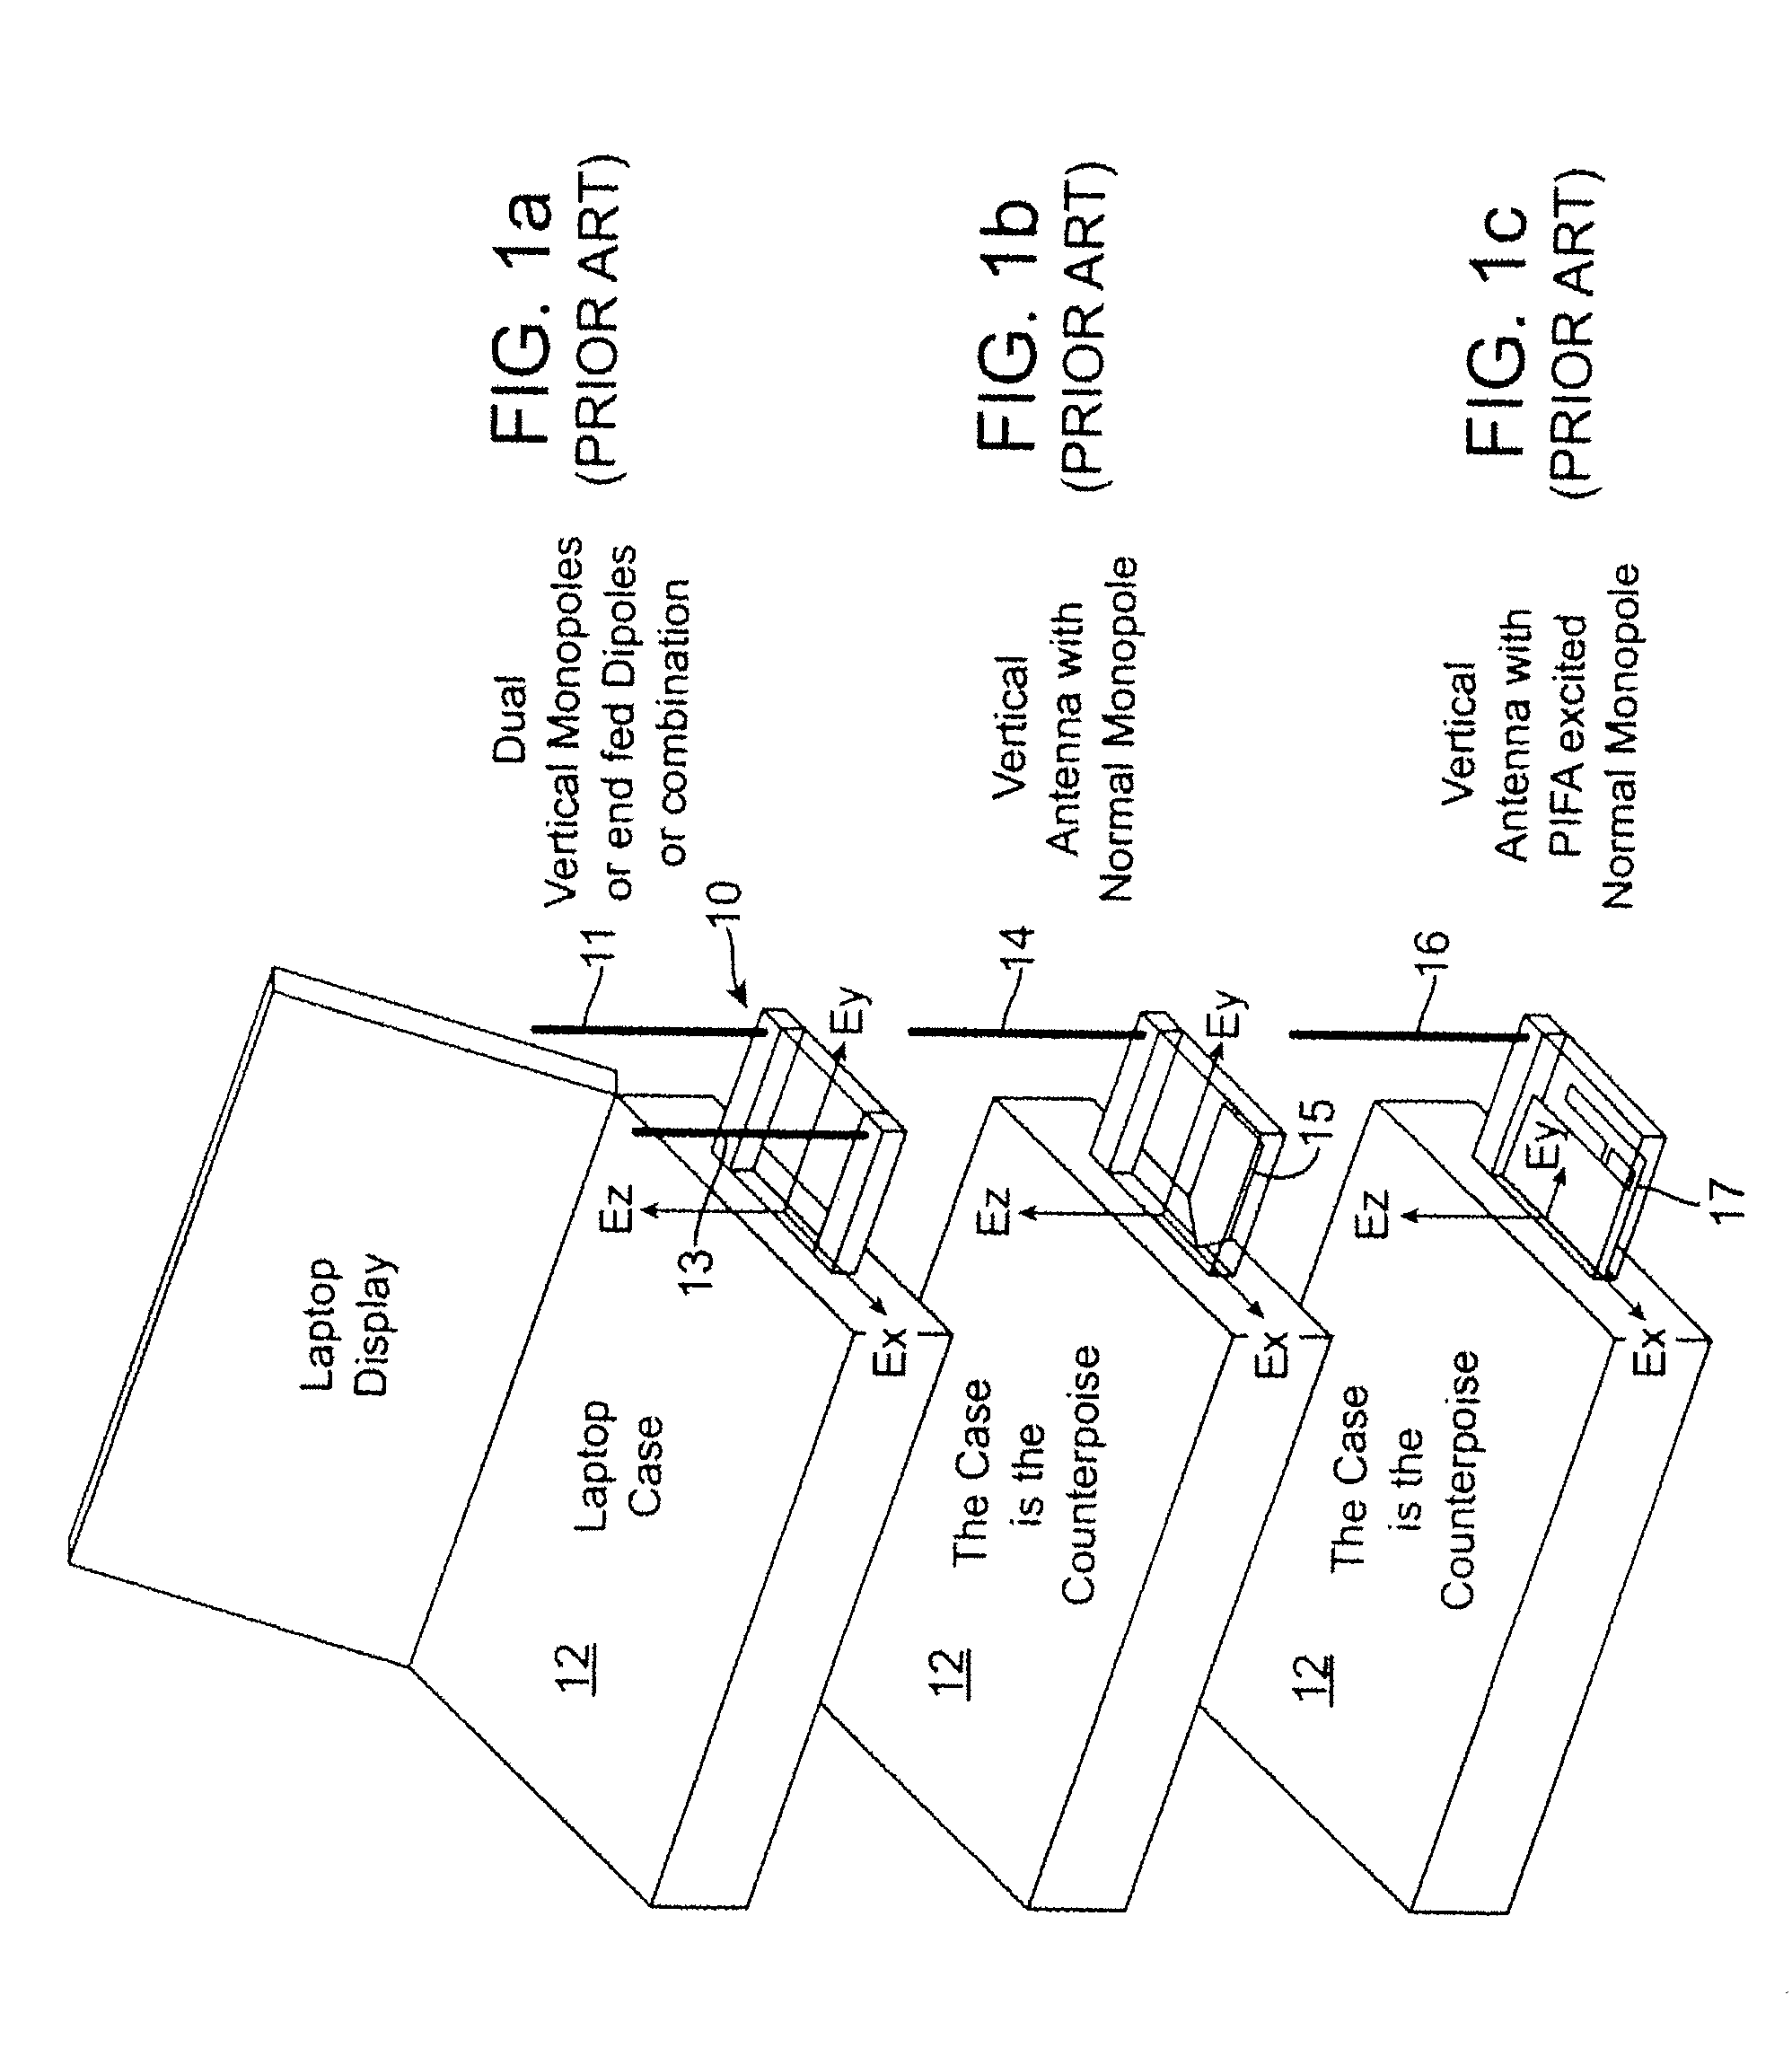 Antenna Configurations for Compact Device Wireless Communication